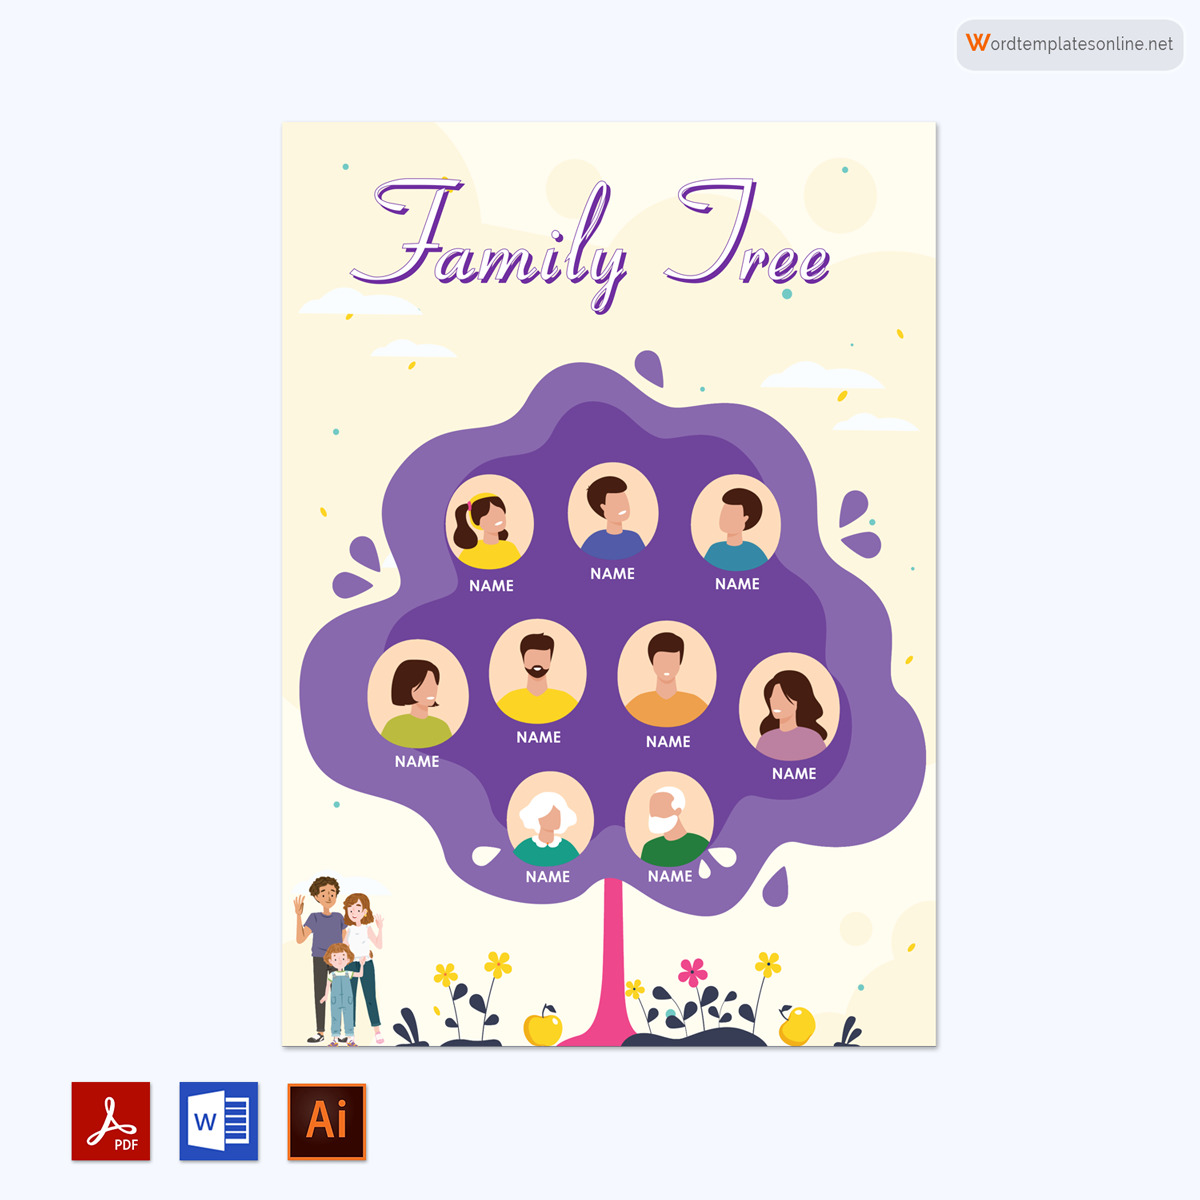  family tree template online 01